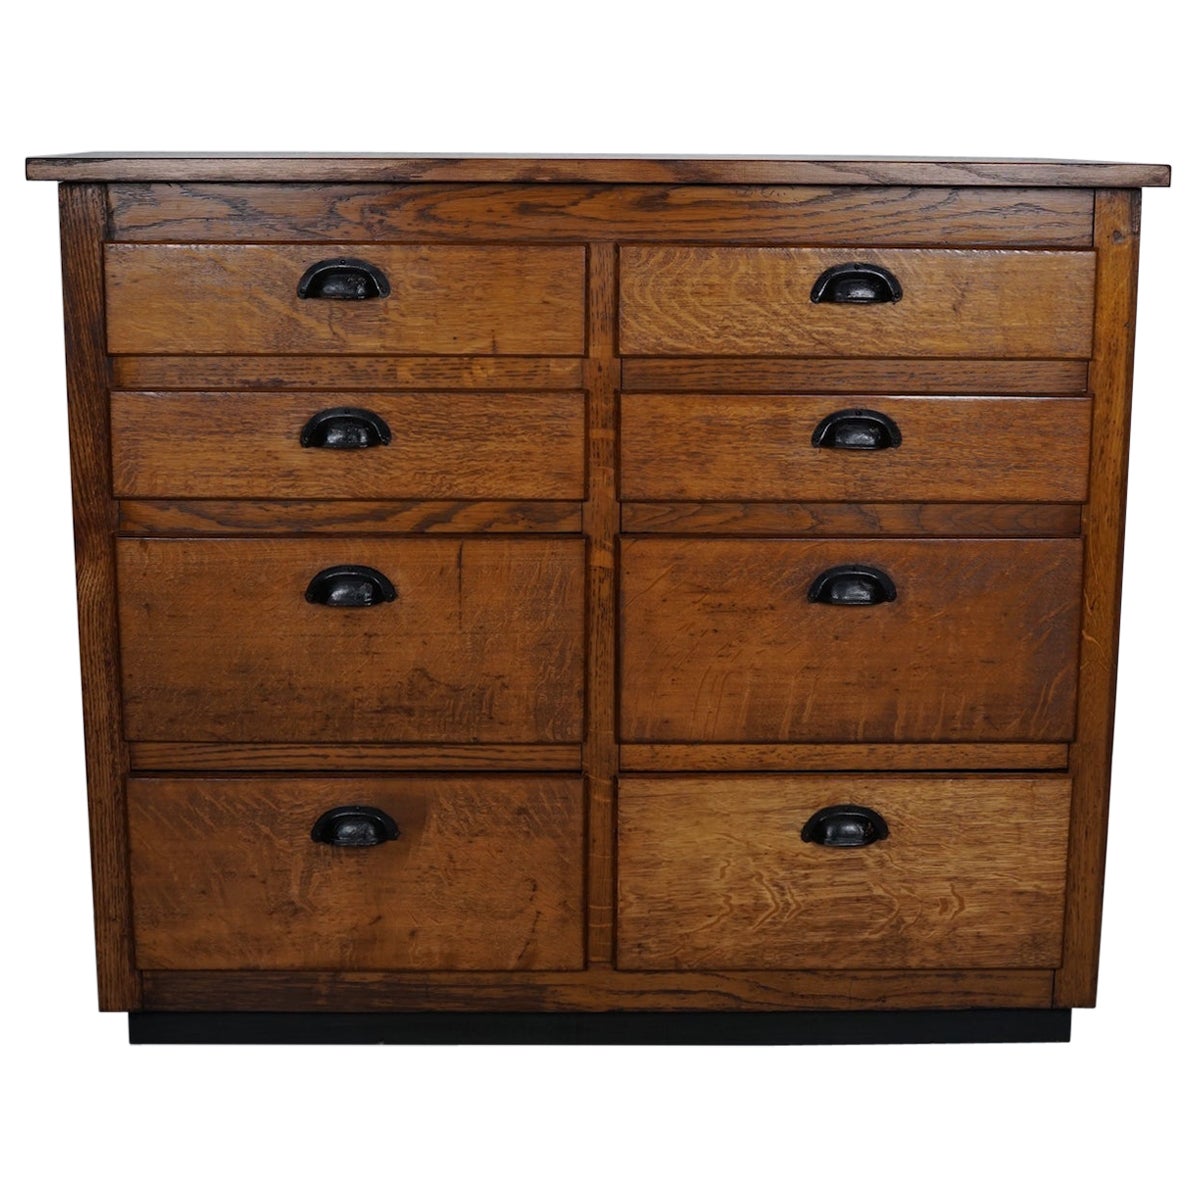 Belgian Industrial Oak Apothecary Cabinet / Bank of Drawers, 1940s For Sale